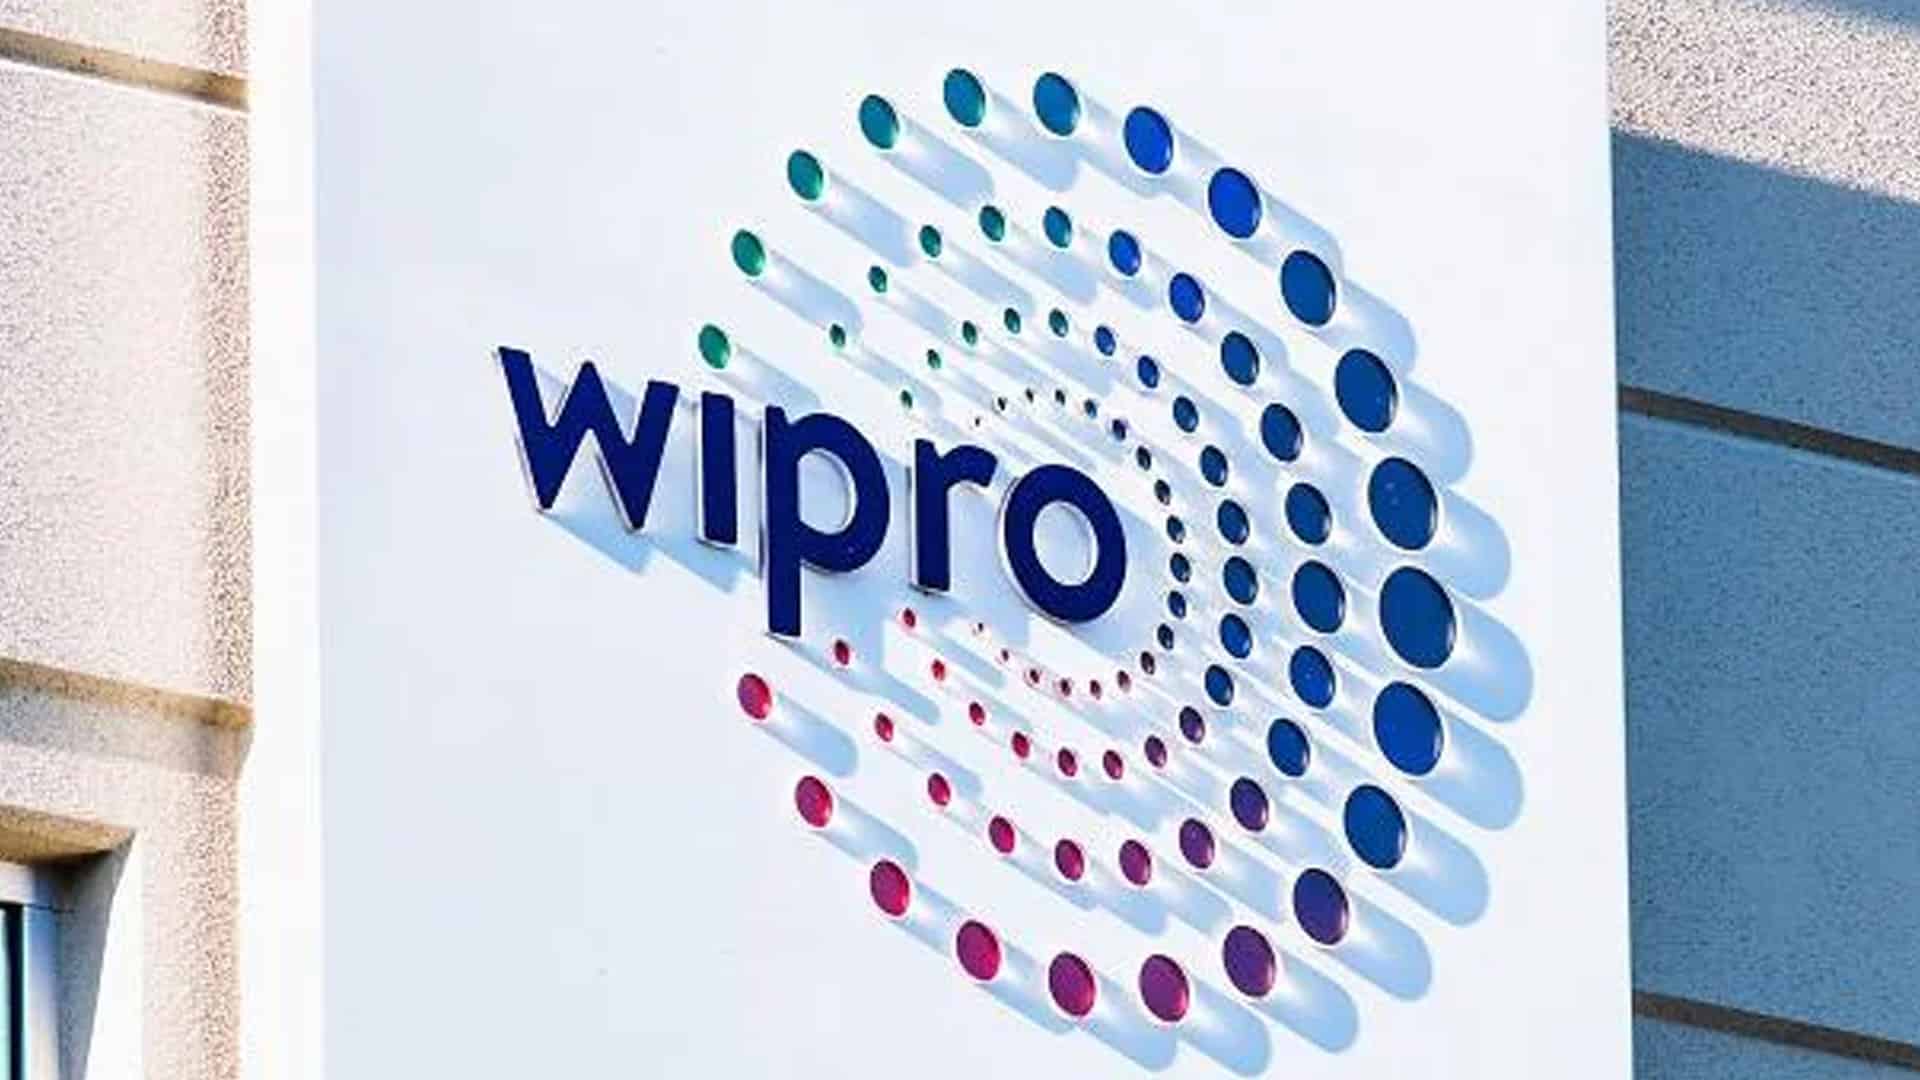 Wipro cuts salary offers to freshers awaiting onboarding; IT union NITES slams move as 'unfair'